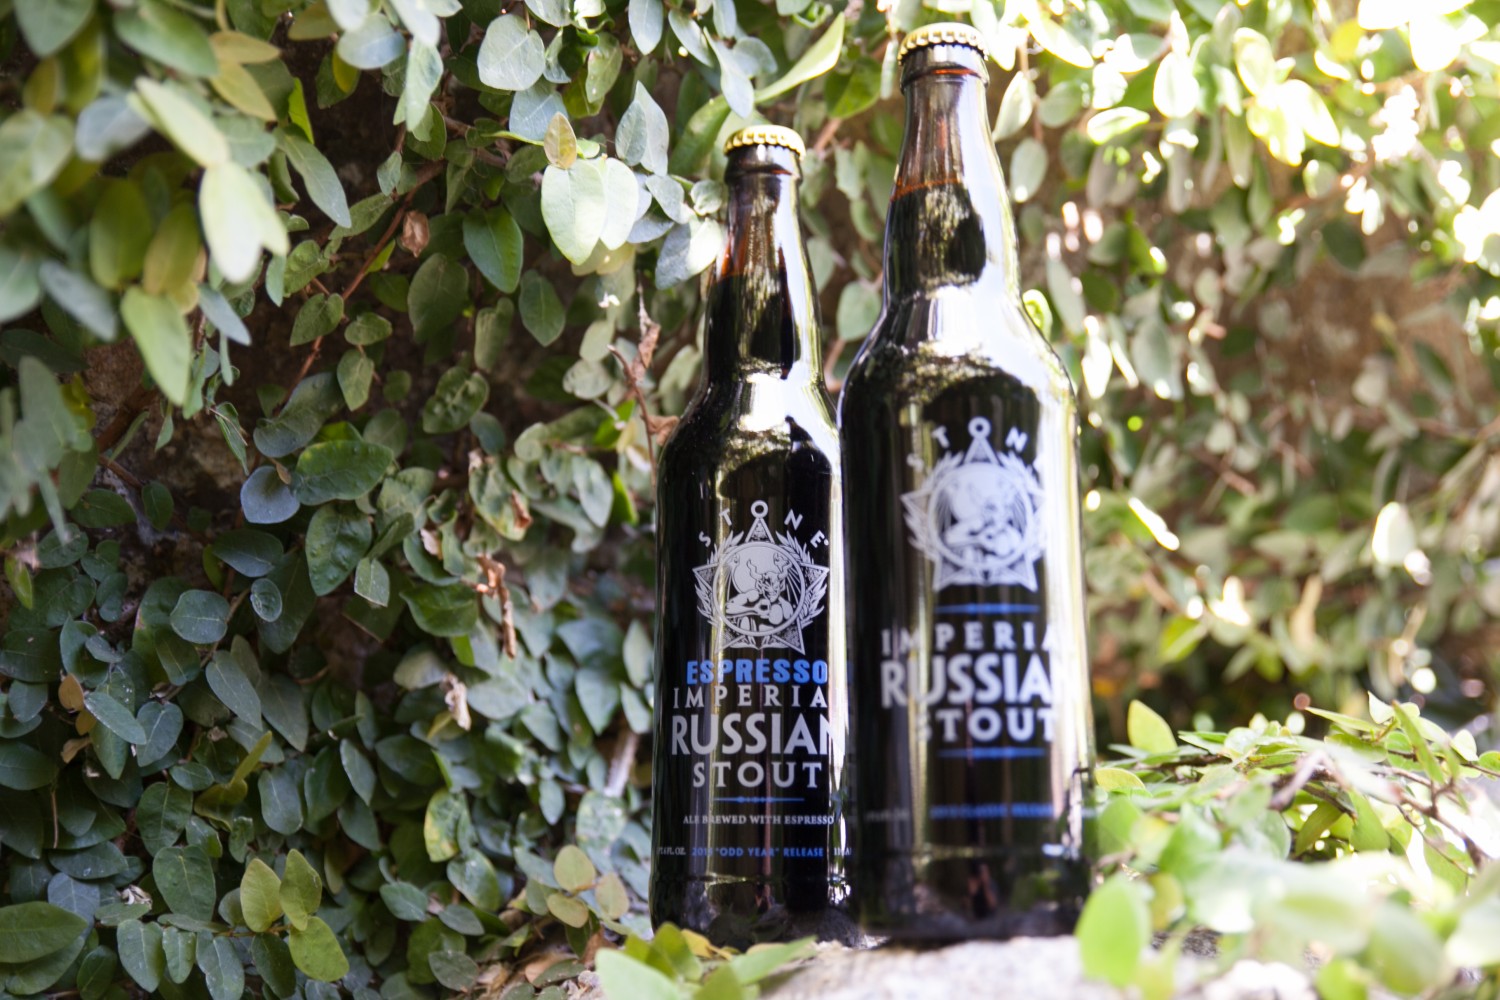 Imperial Russian Stout bottles